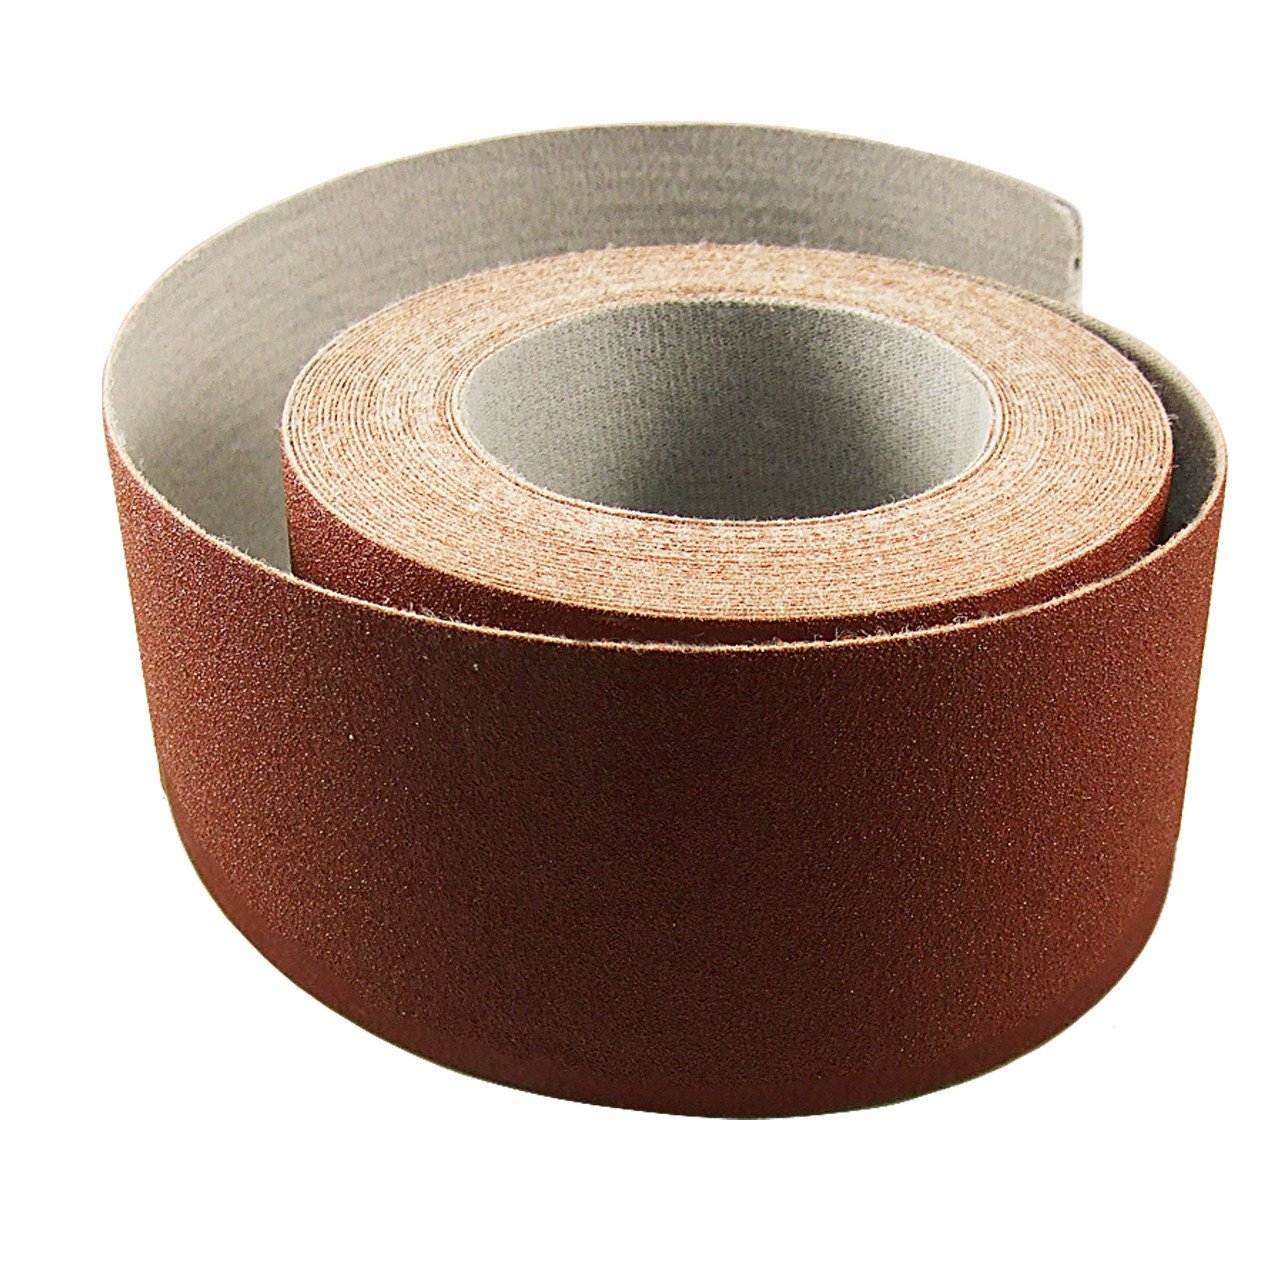 3 Inch X 50 Foot Premium Loop (Felt) Backed Ready-to-Cut Cloth Sanding Roll for Hook and Loop Drum Sanders - Red Label Abrasives